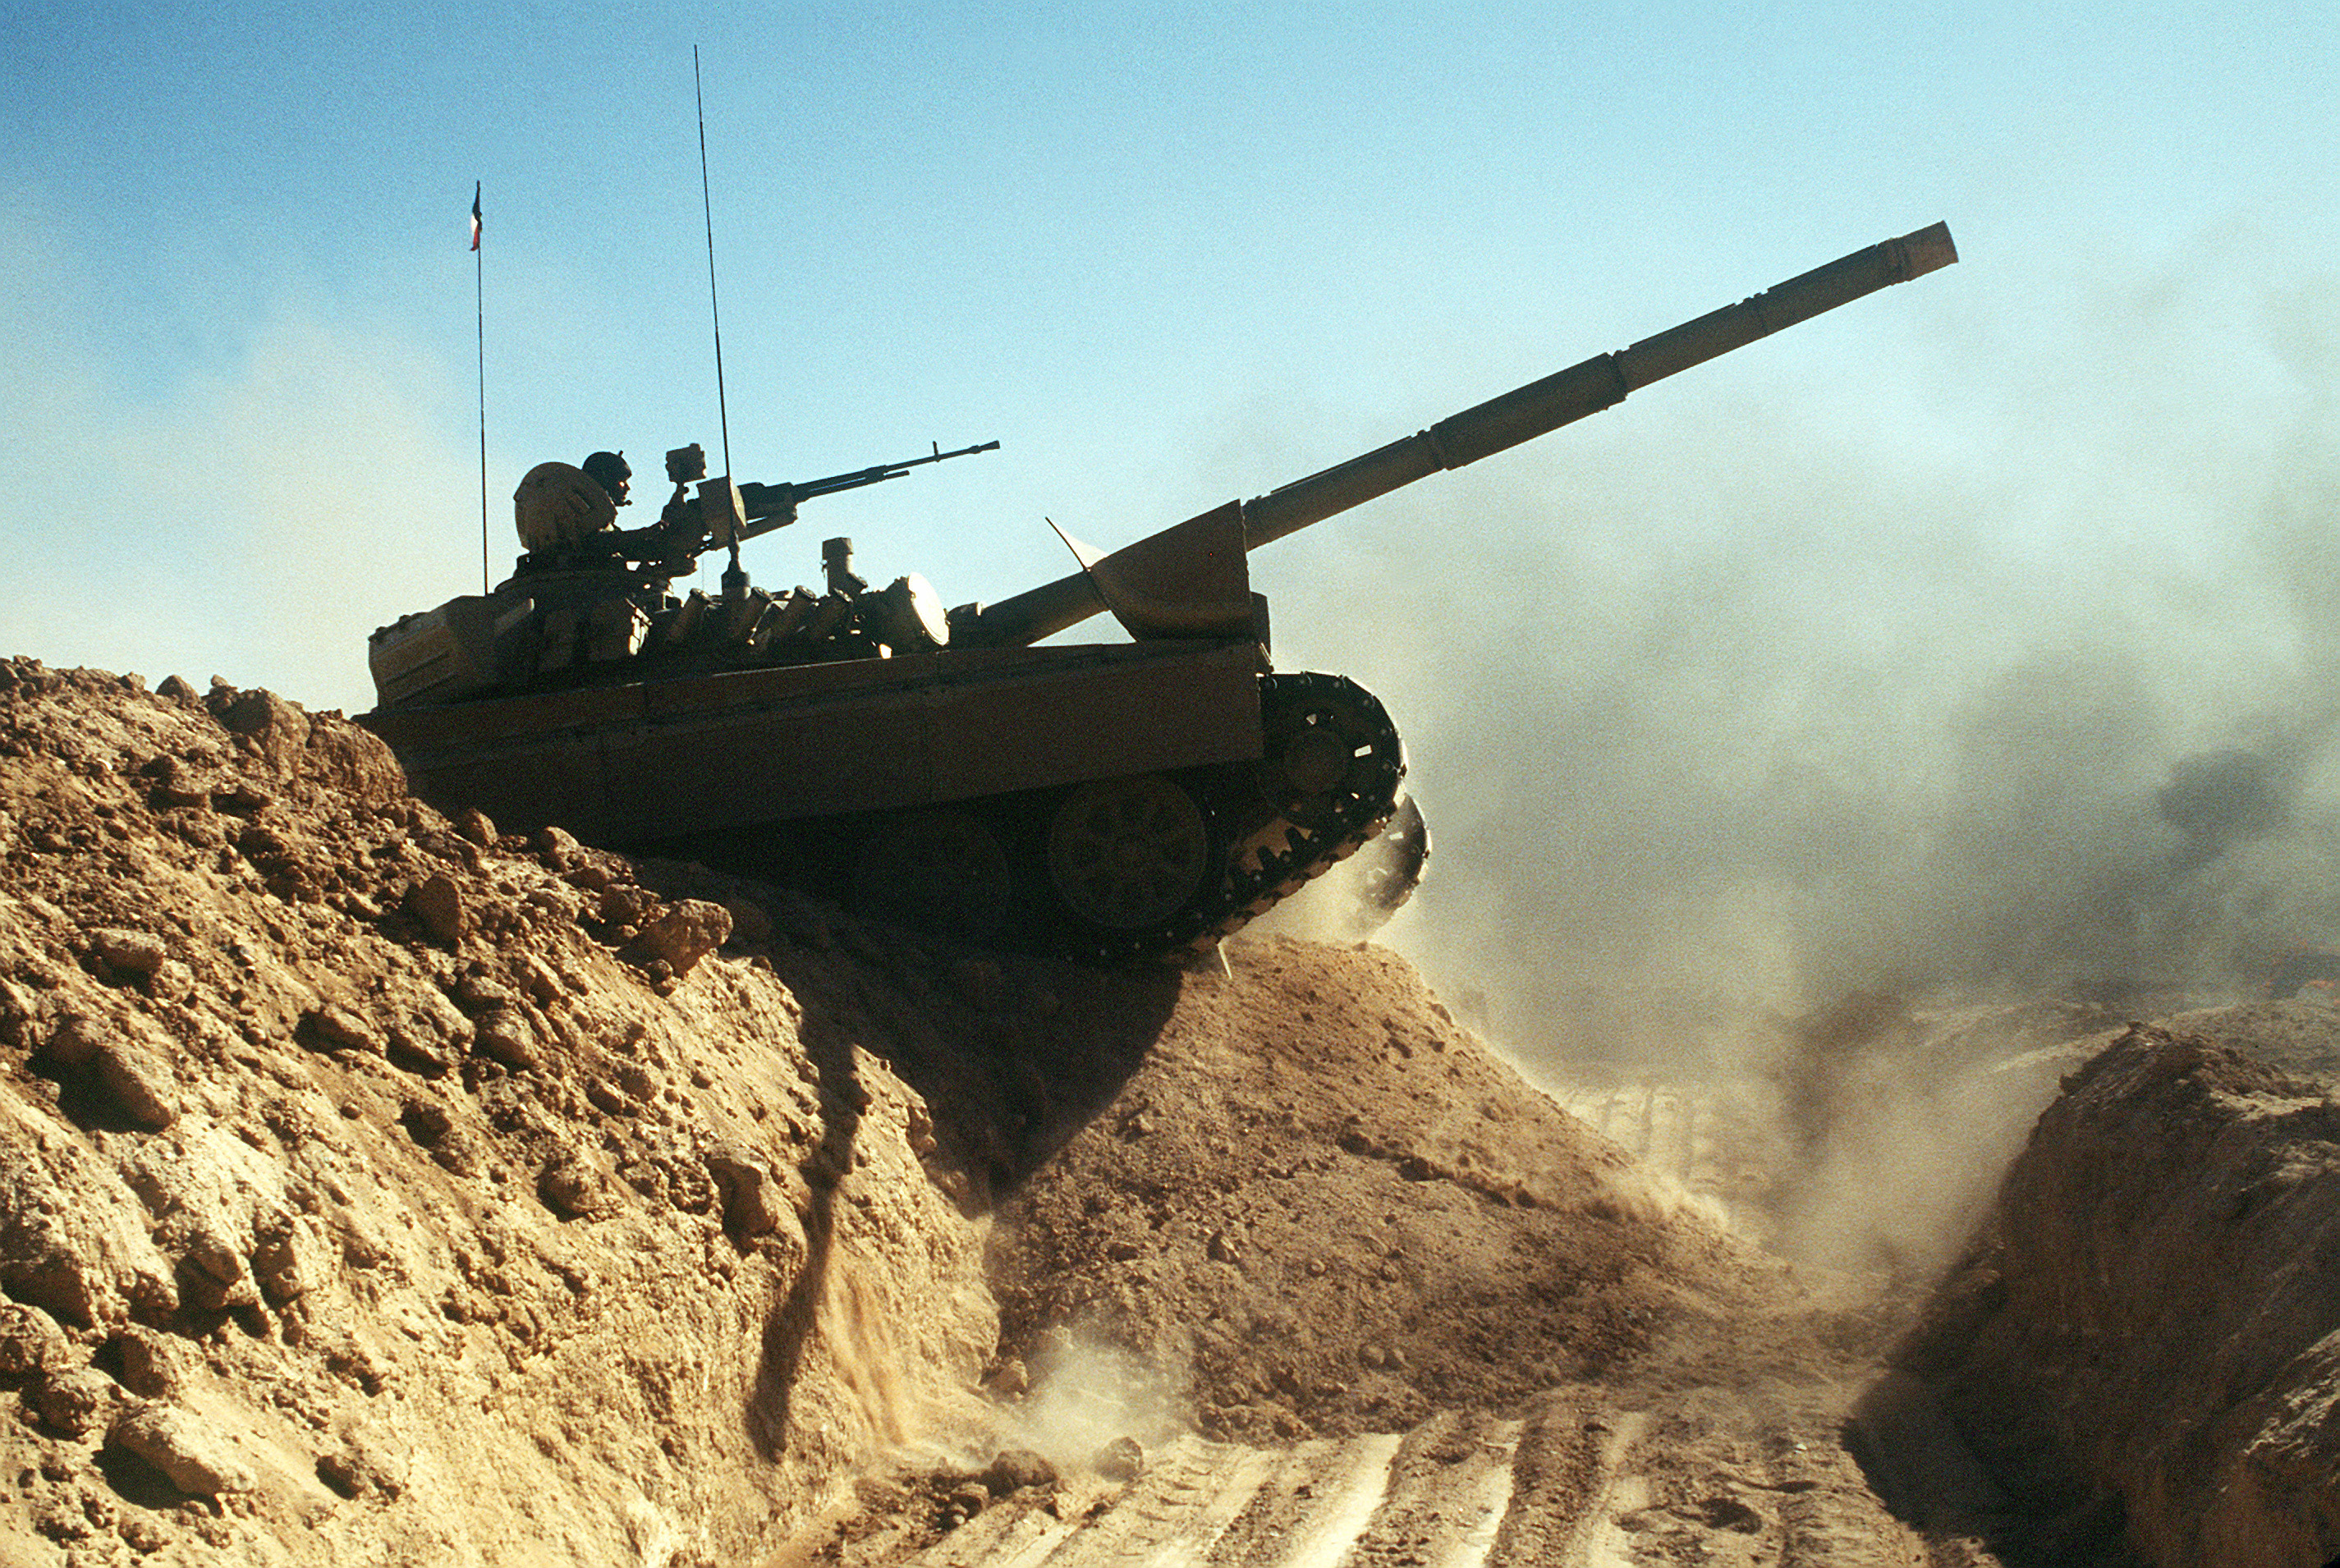 File:A Kuwaiti M-84AB tank crosses a trench during Operation